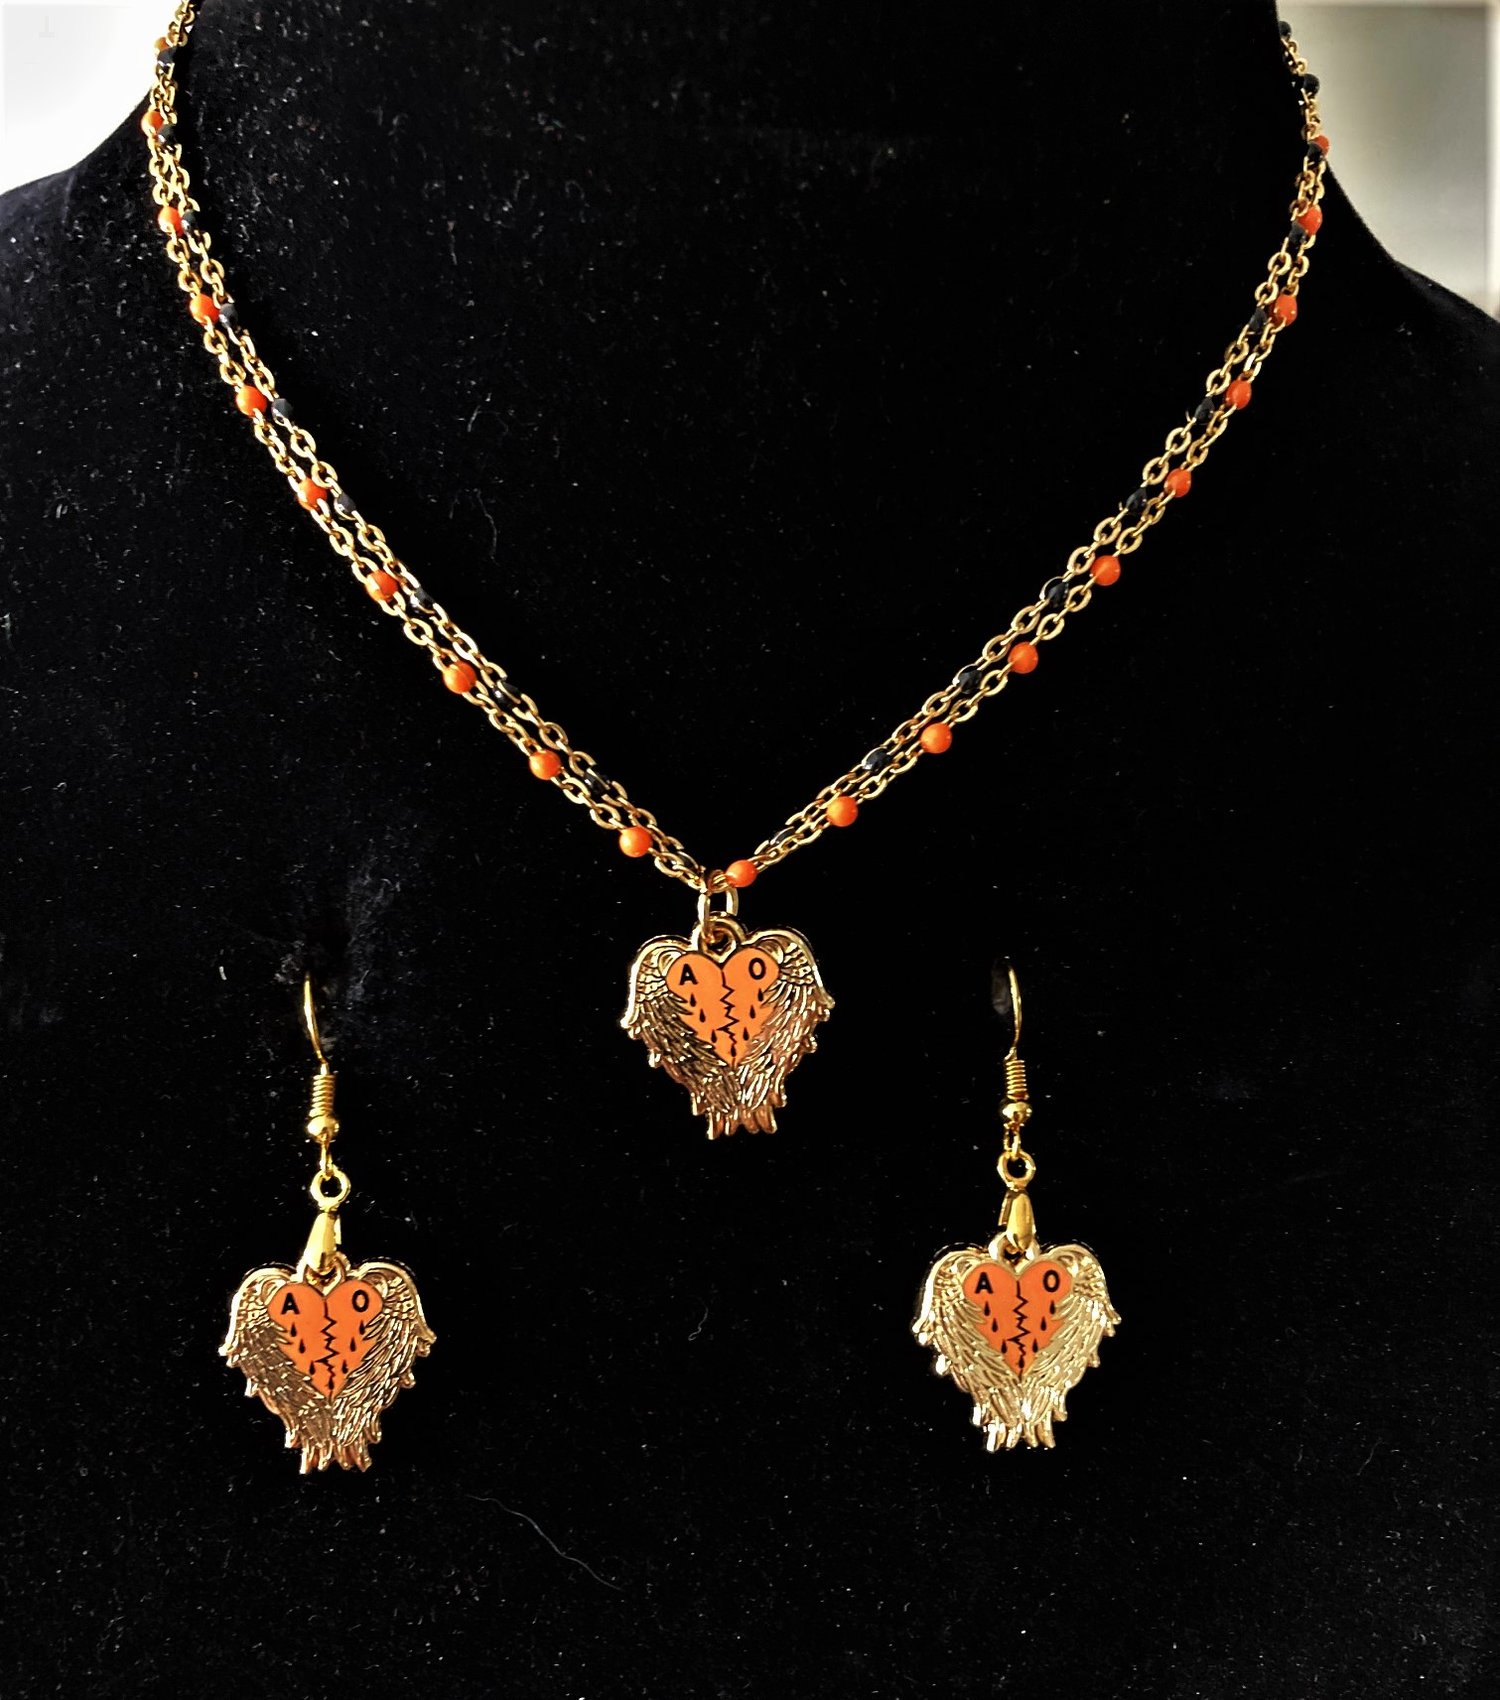 Image of Agent Orange Angel Heart Necklace and Earrings combo